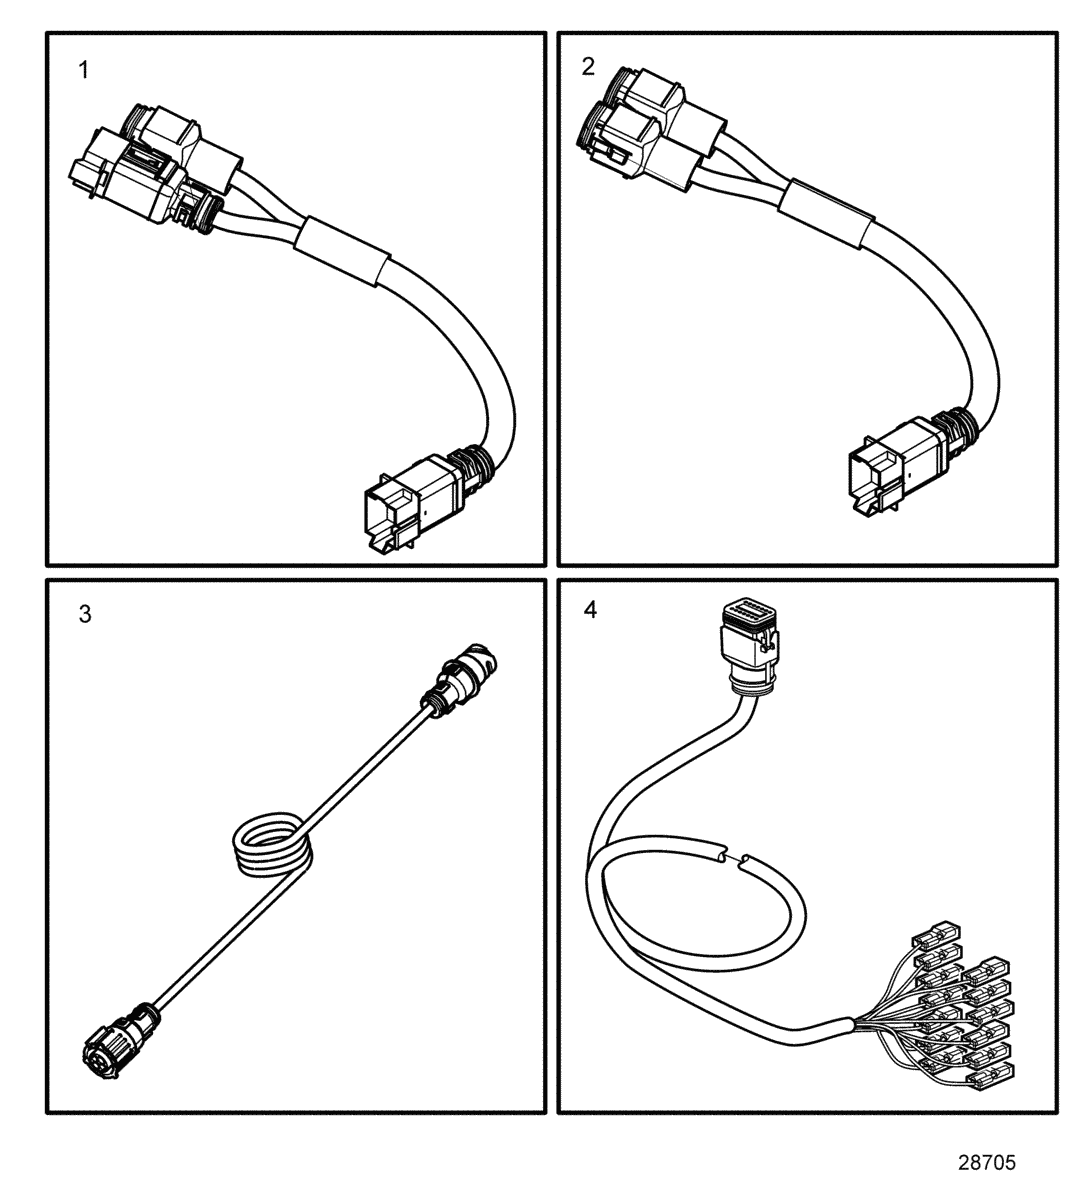 Electric system, engine wiring harness